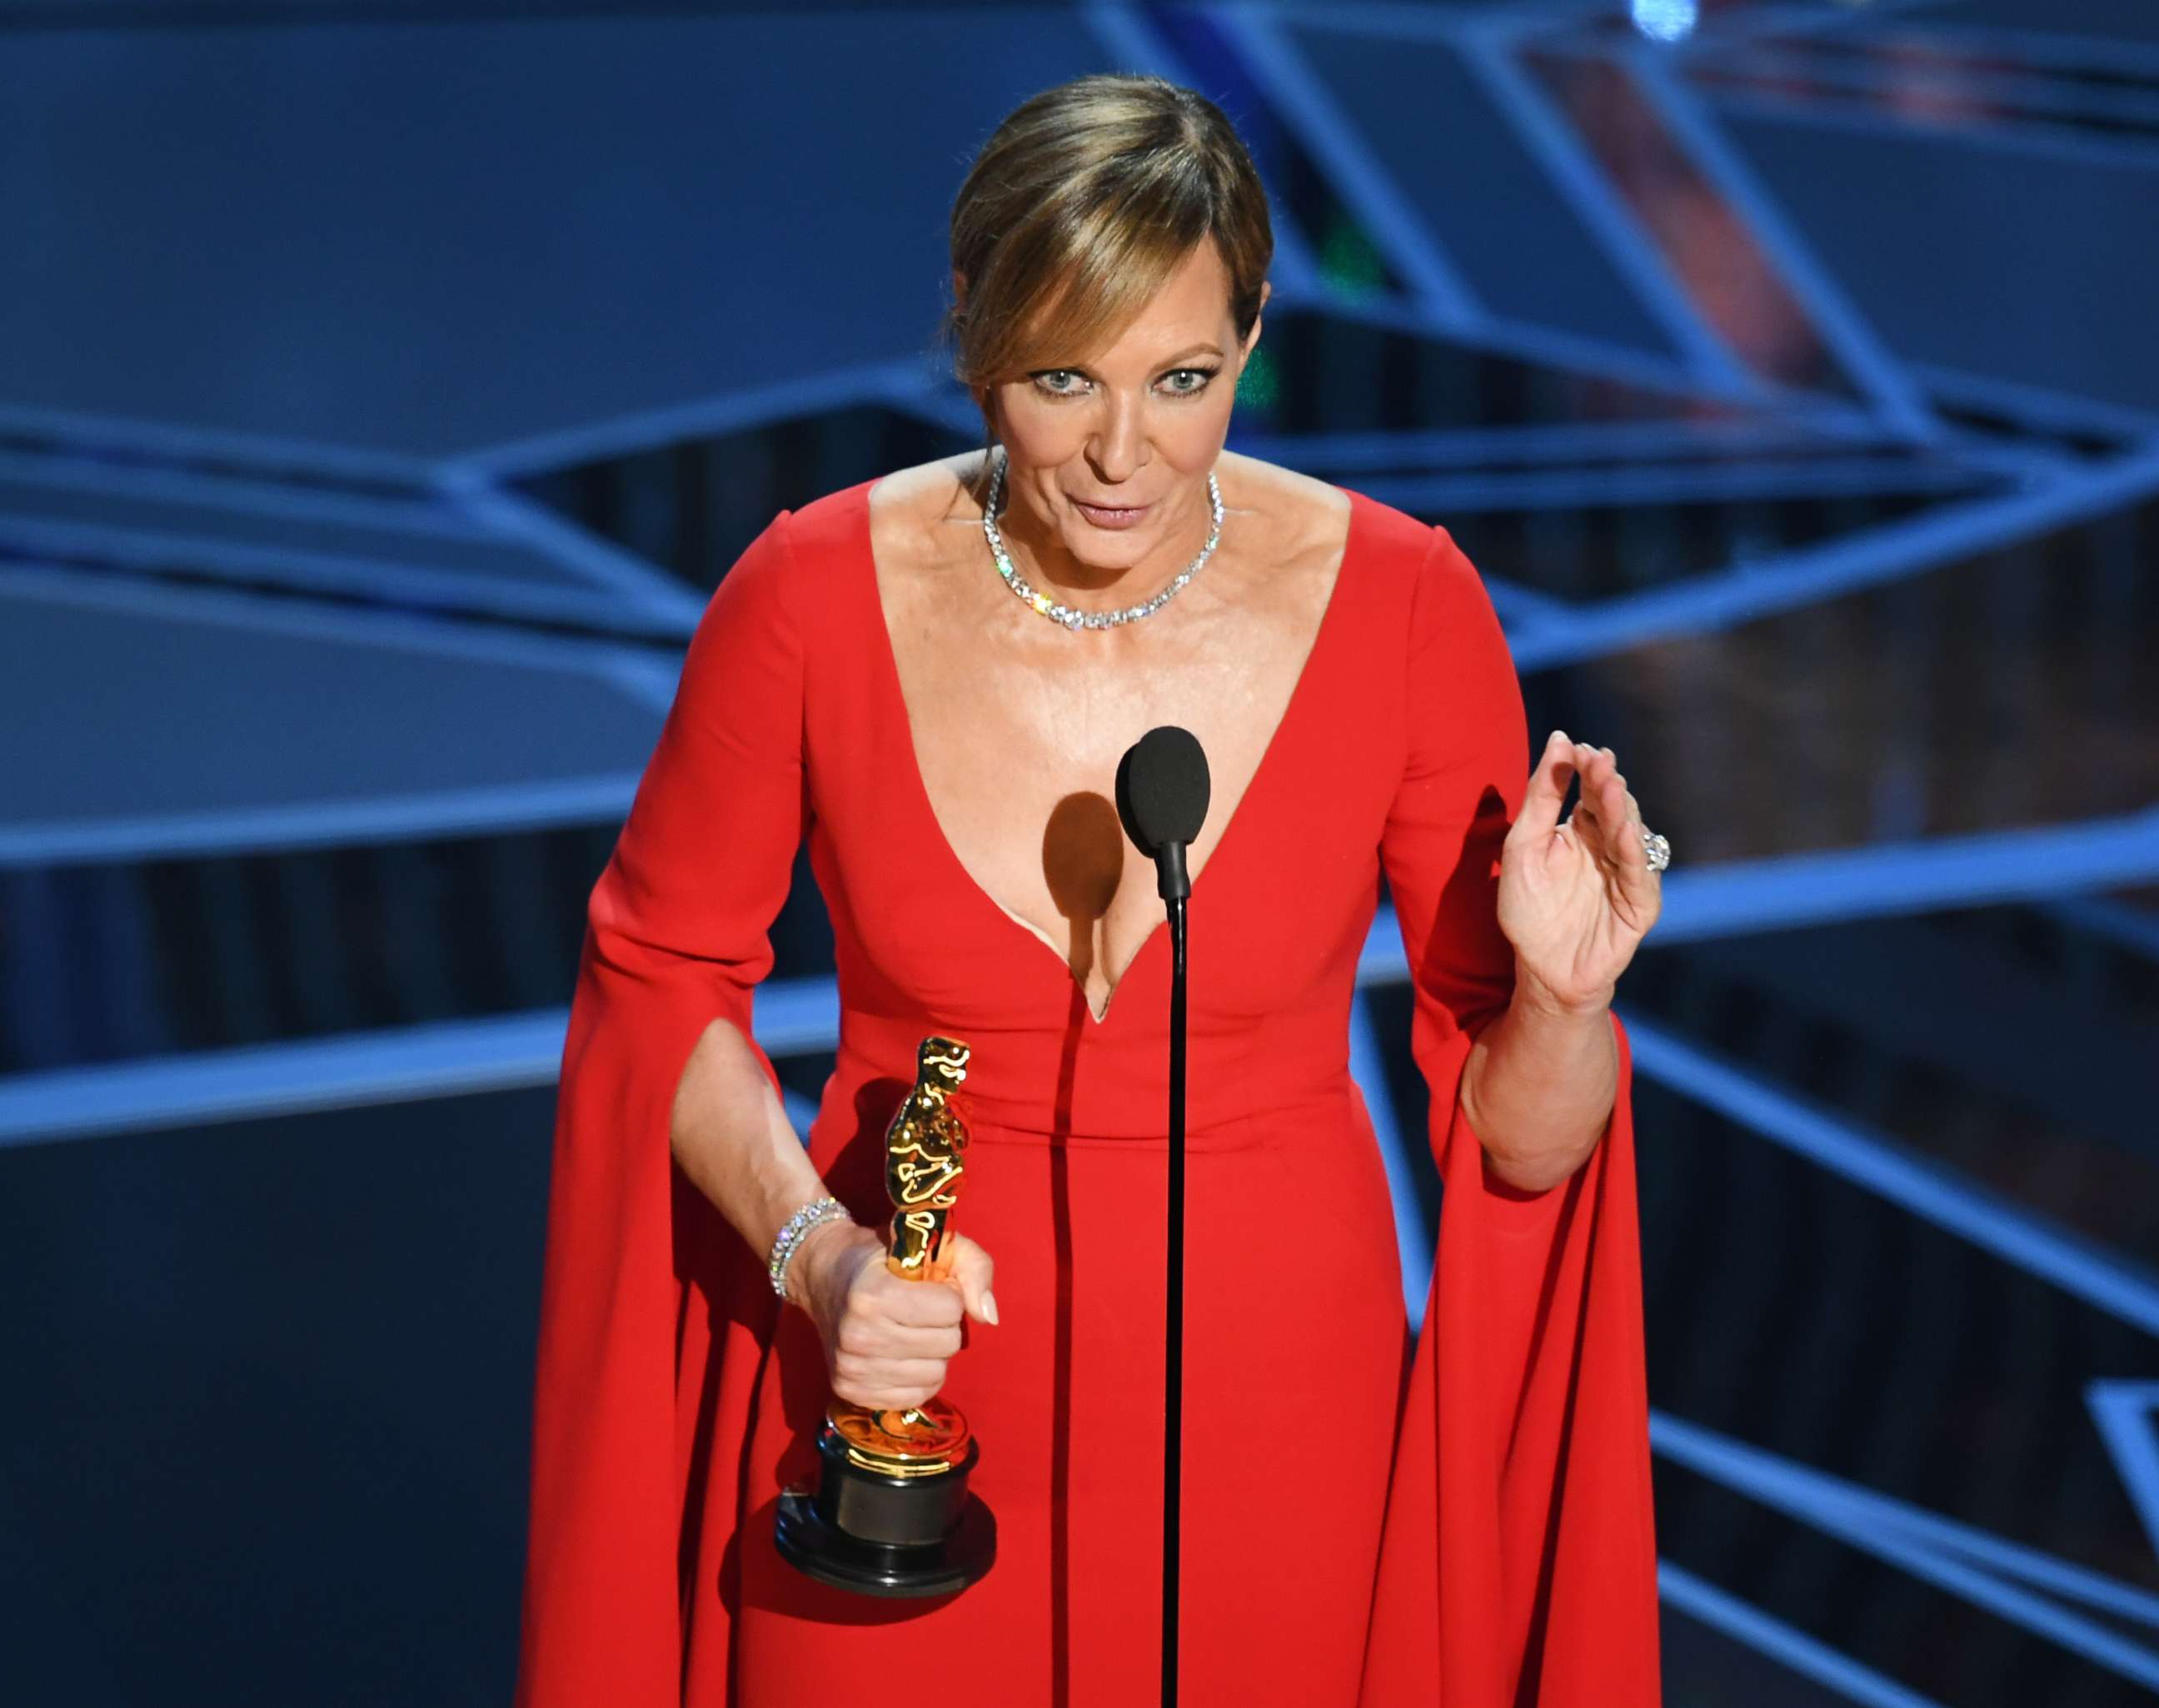 PHOTO: Allison Janney accepts Best Supporting Actress for 'I, Tonya' onstage during the 90th Annual Academy Awards at the Dolby Theatre at Hollywood & Highland Center on March 4, 2018 in Hollywood, California.